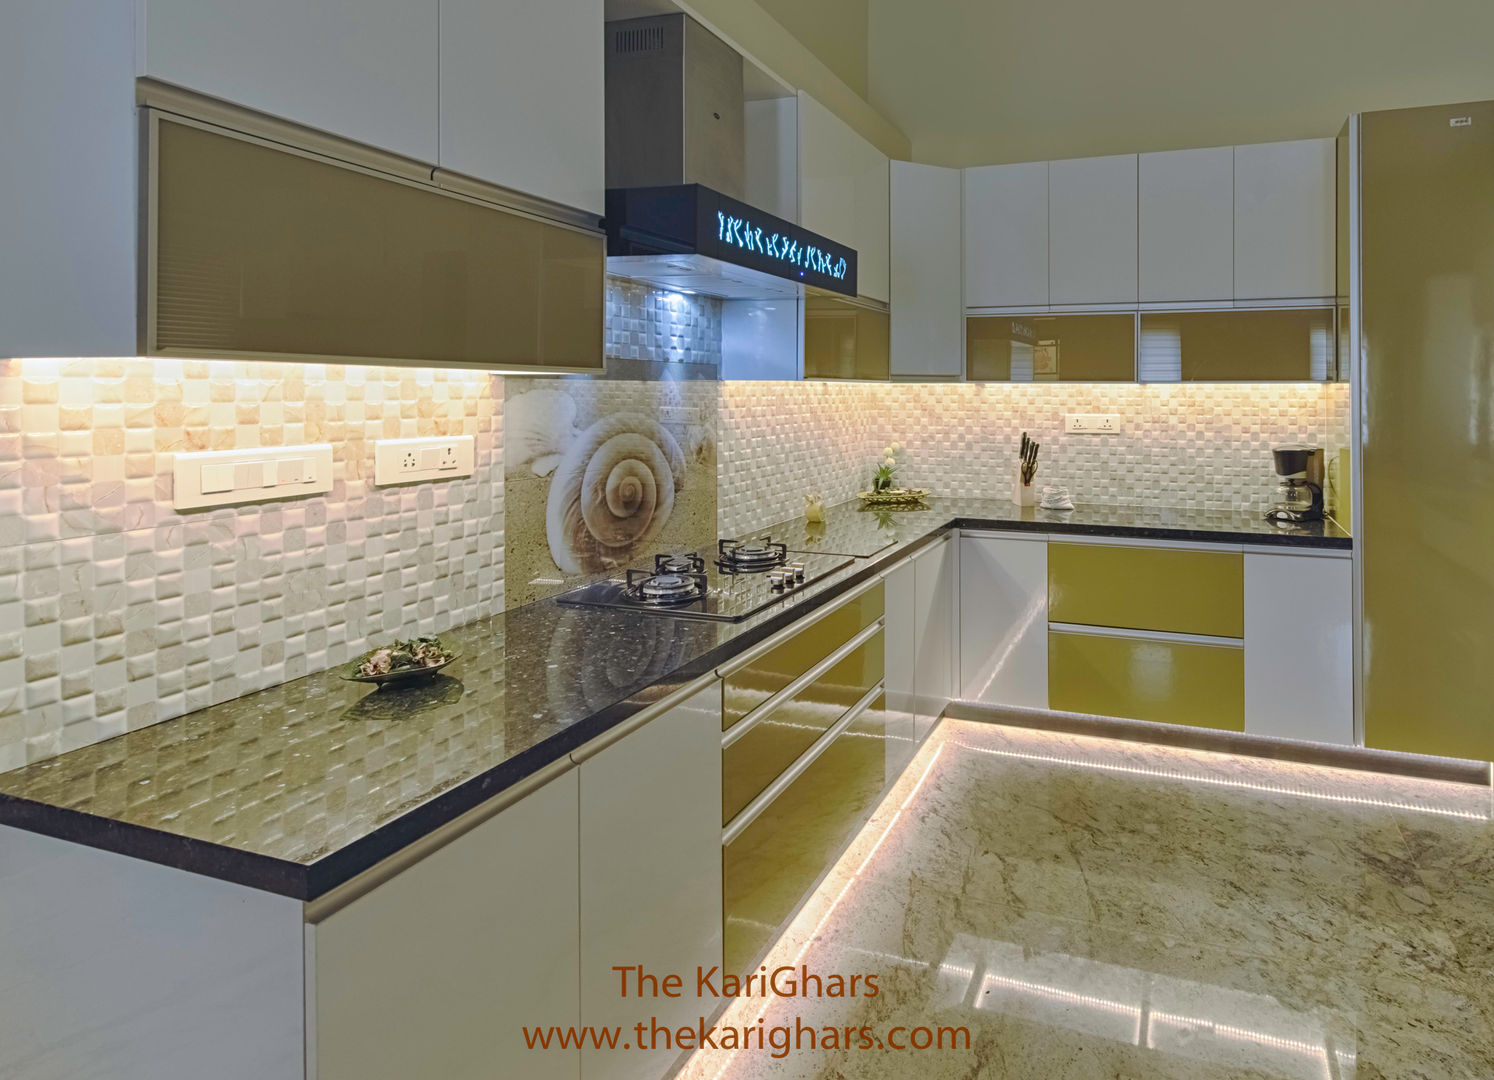 Kitchen Designs , The KariGhars The KariGhars Small kitchens